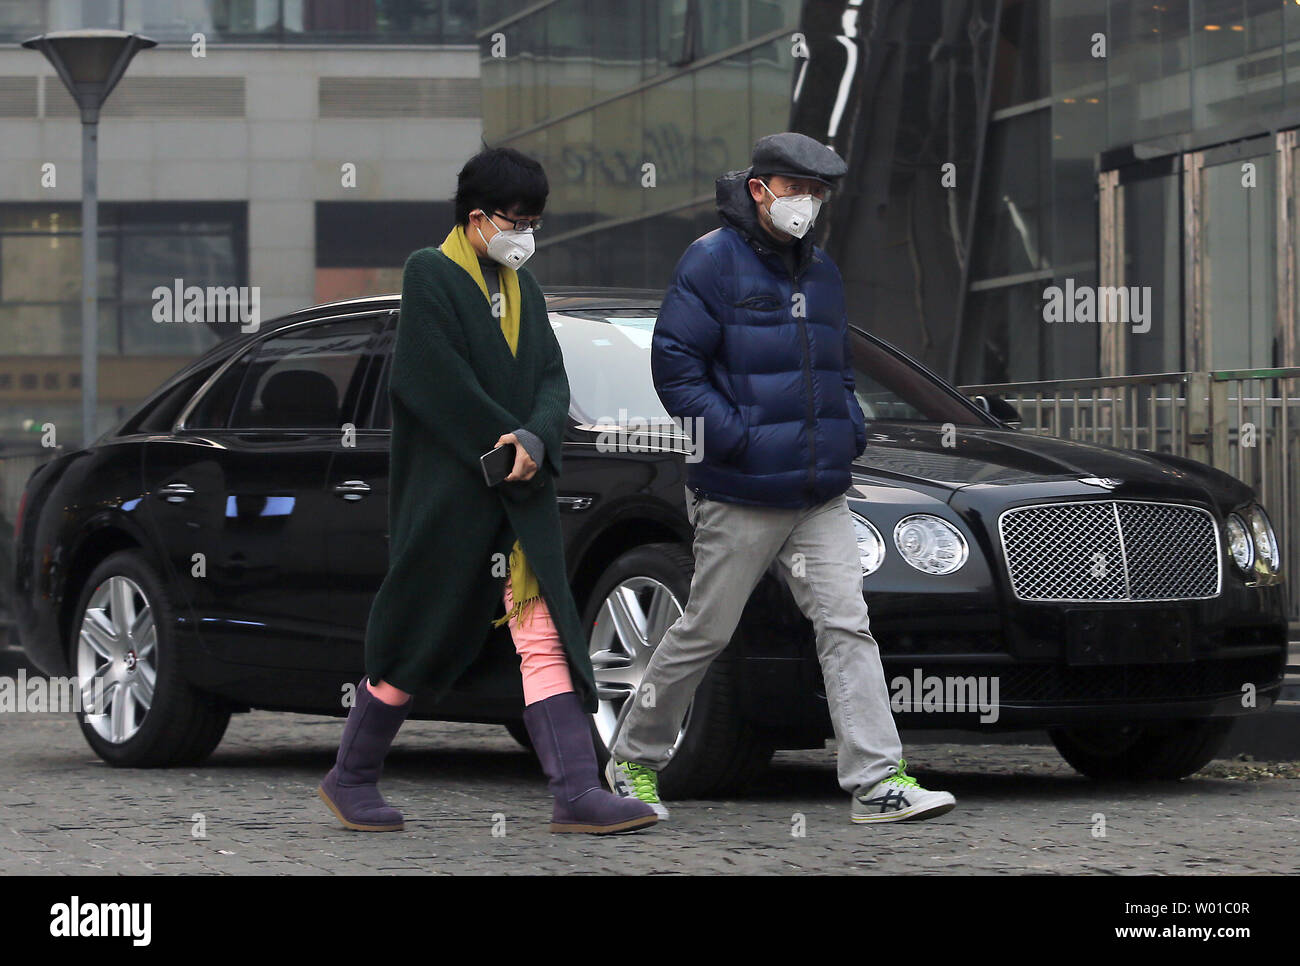 Chinese wearing respirator masks walk past a new Bentley outside a showroom in downtown Beijing on December 3, 2016.  China has imposed a 10 percent tax on ultra high-end luxury cars costing over $190,000 such as Ferraris, Bentleys, Aston Martins, Maseratis, Lamborghinis and Rolls-Rocye cars in a nationwide crackdown on conspicuous consumption and graft, while promoting more fuel-efficient vehicles.         Photo by Stephen Shaver/UPI Stock Photo